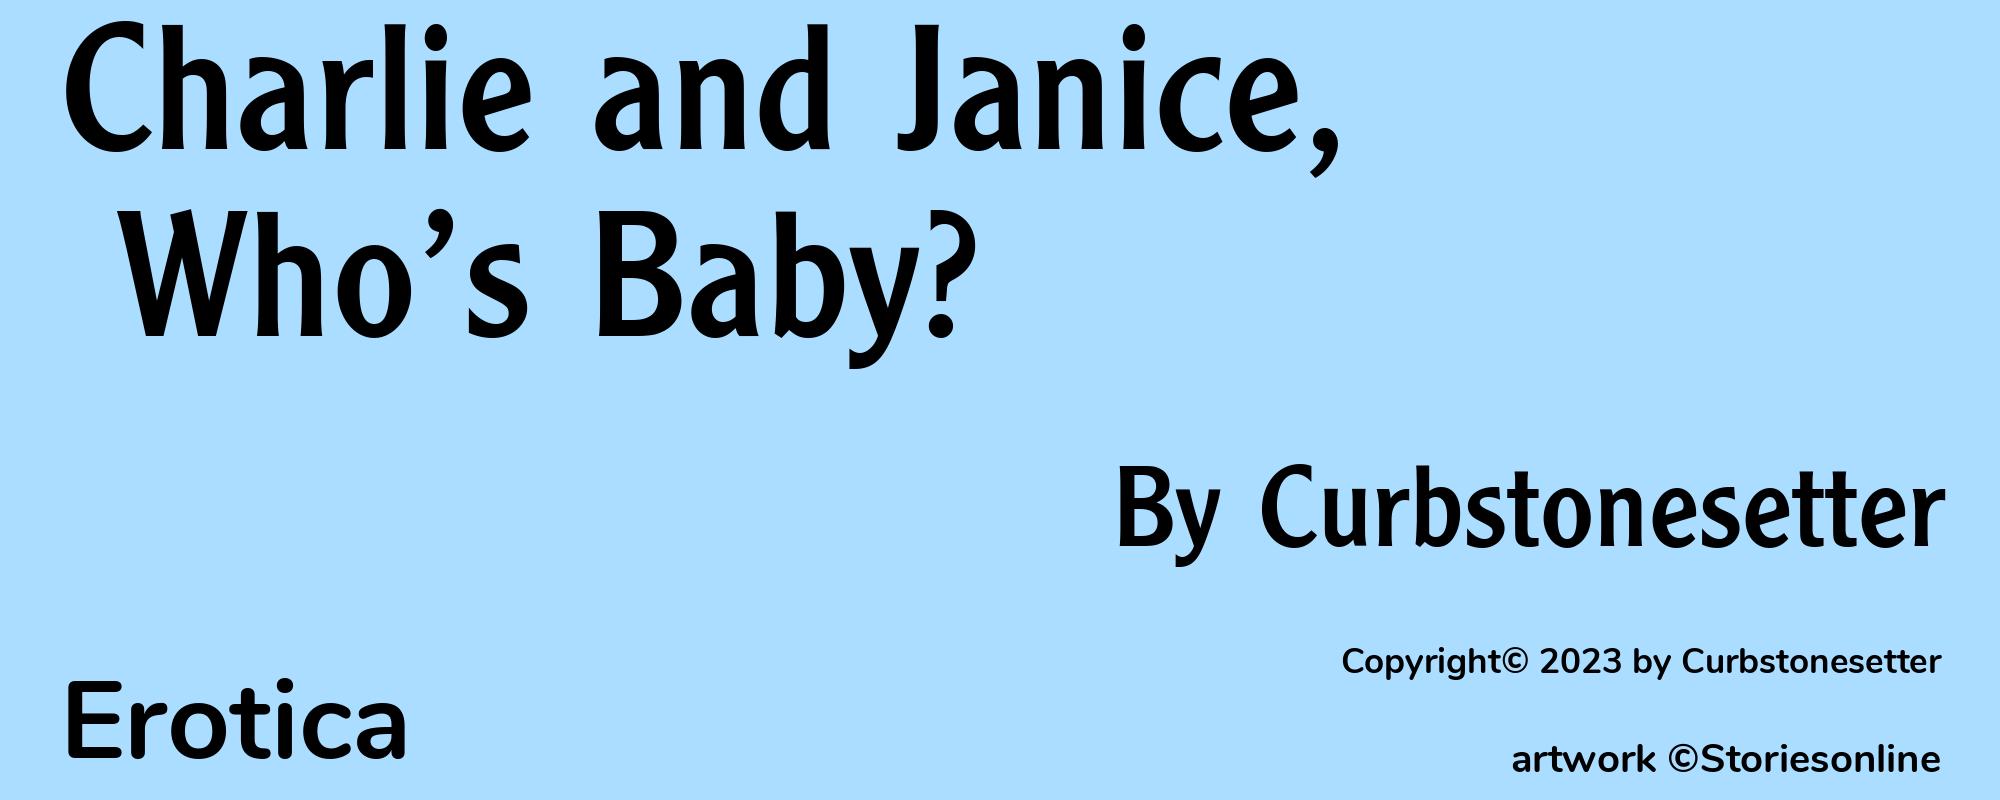 Charlie and Janice, Who’s Baby? - Cover